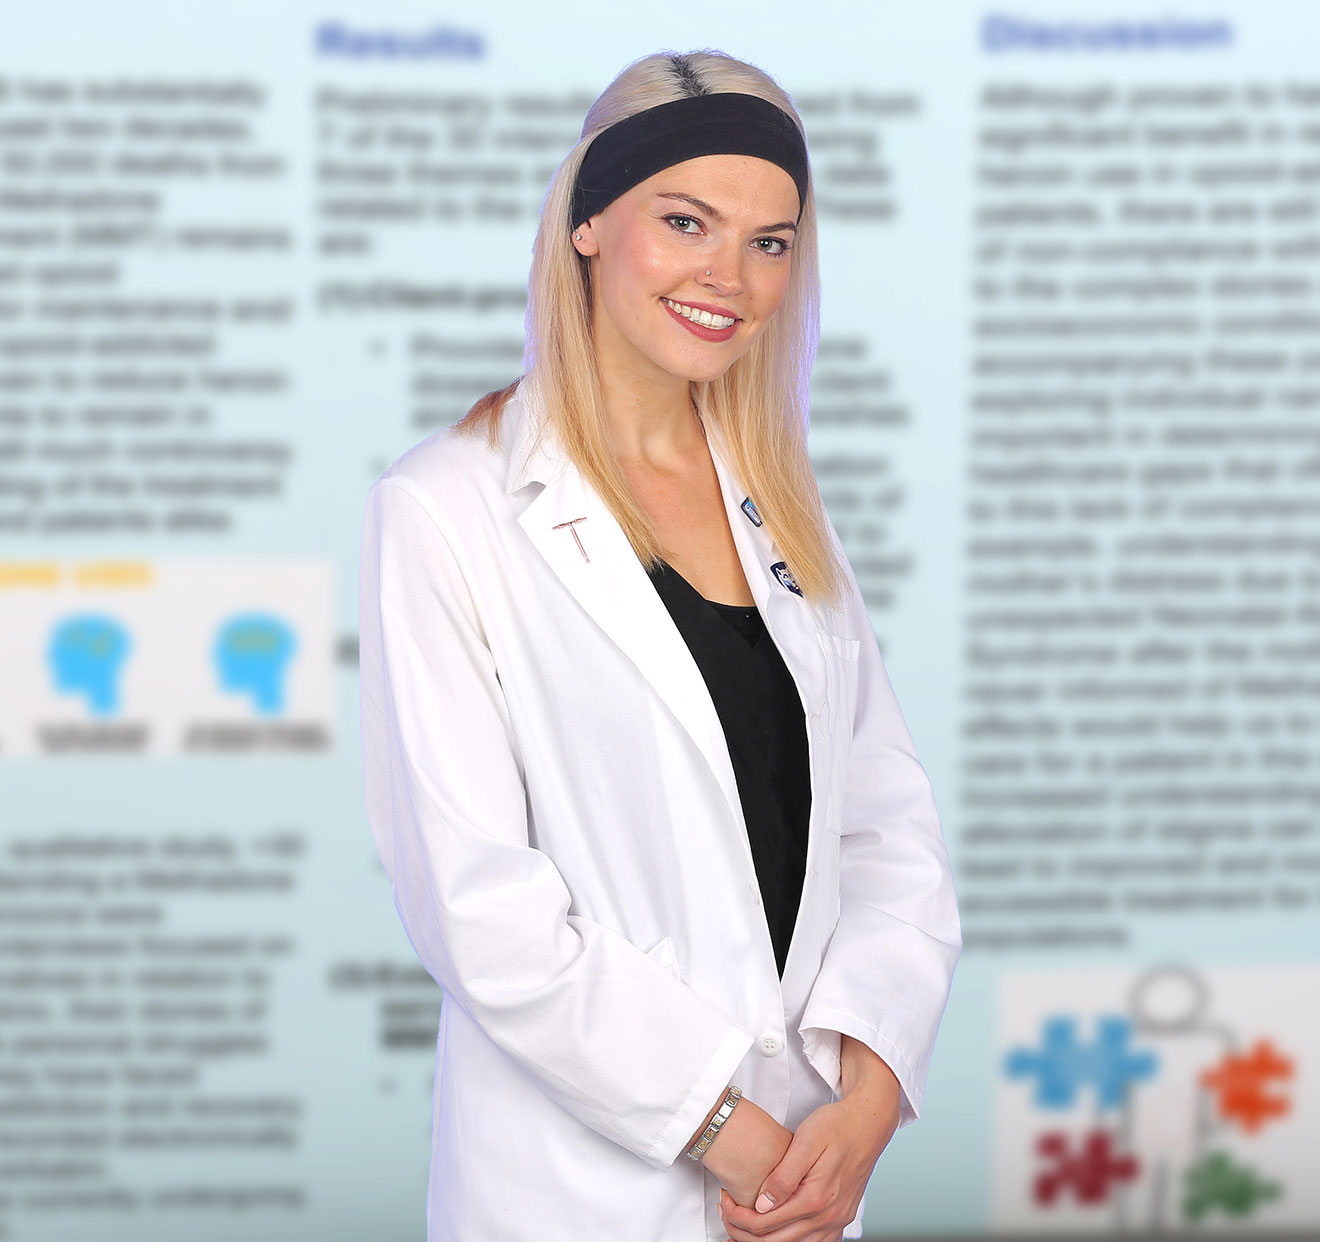 A medical student wearing a medical coat is pictured with an out-of-focus scholarly poster of hers visible in the background.